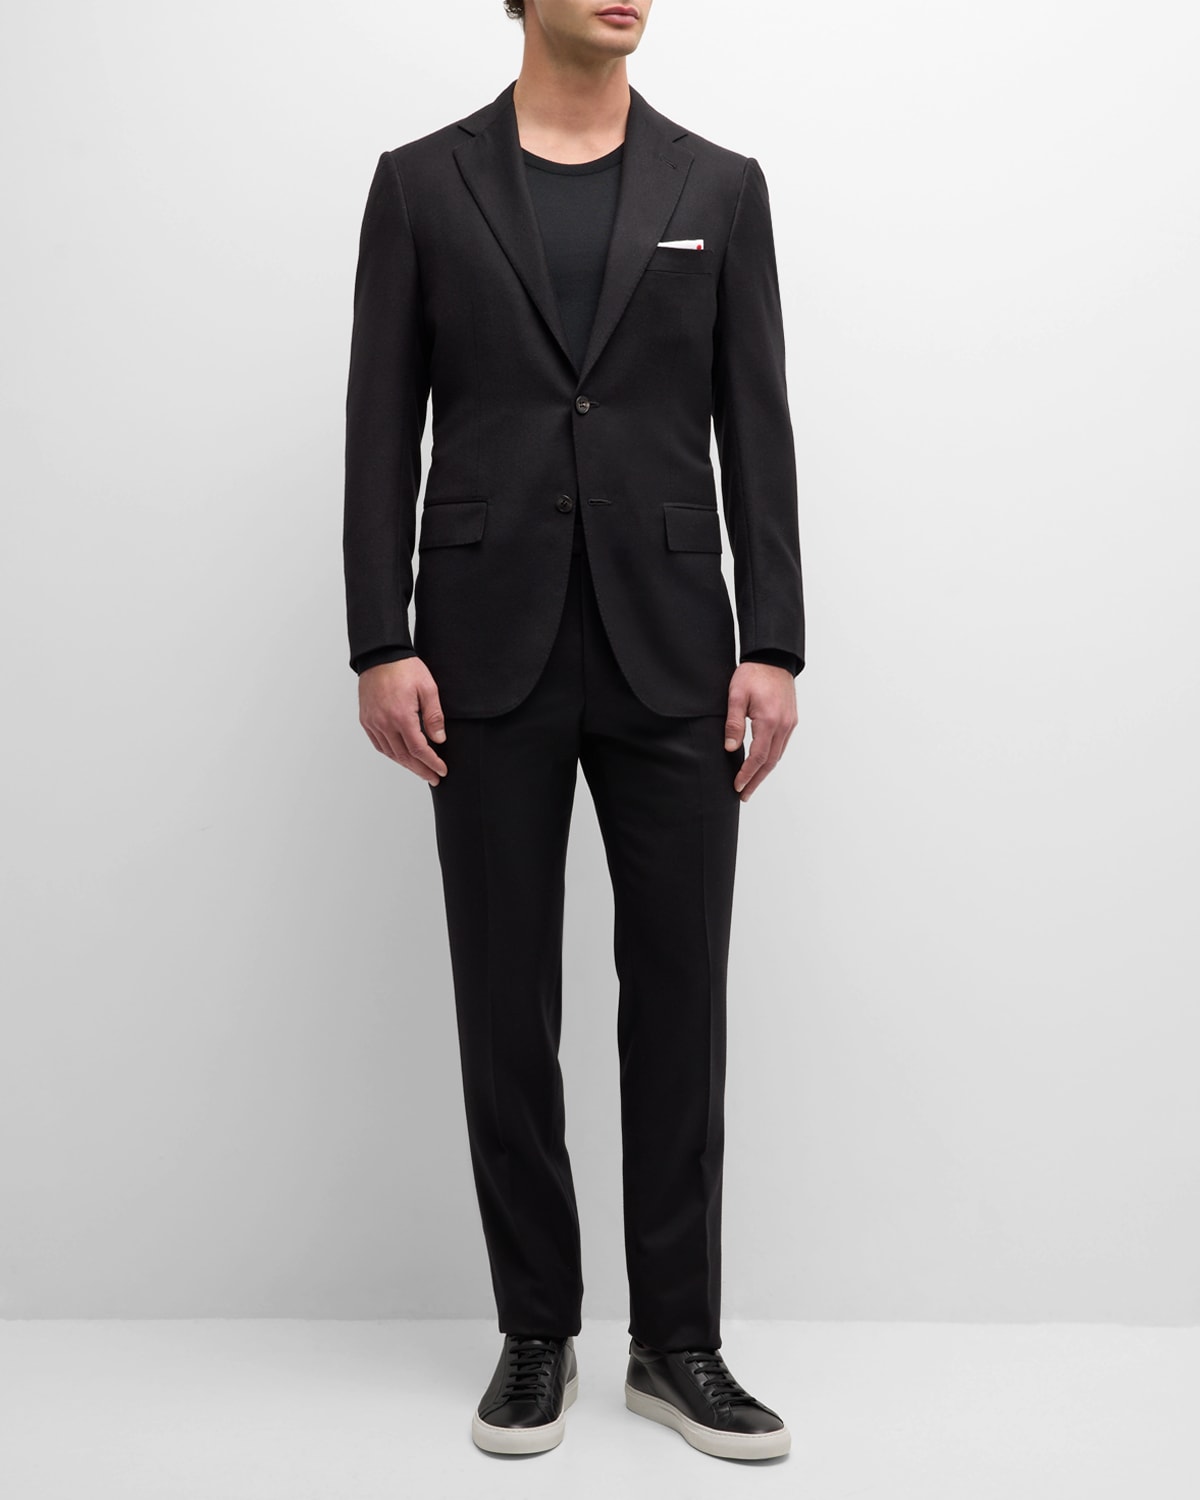 Kiton Men's Wool-cashmere Solid Suit In Blk